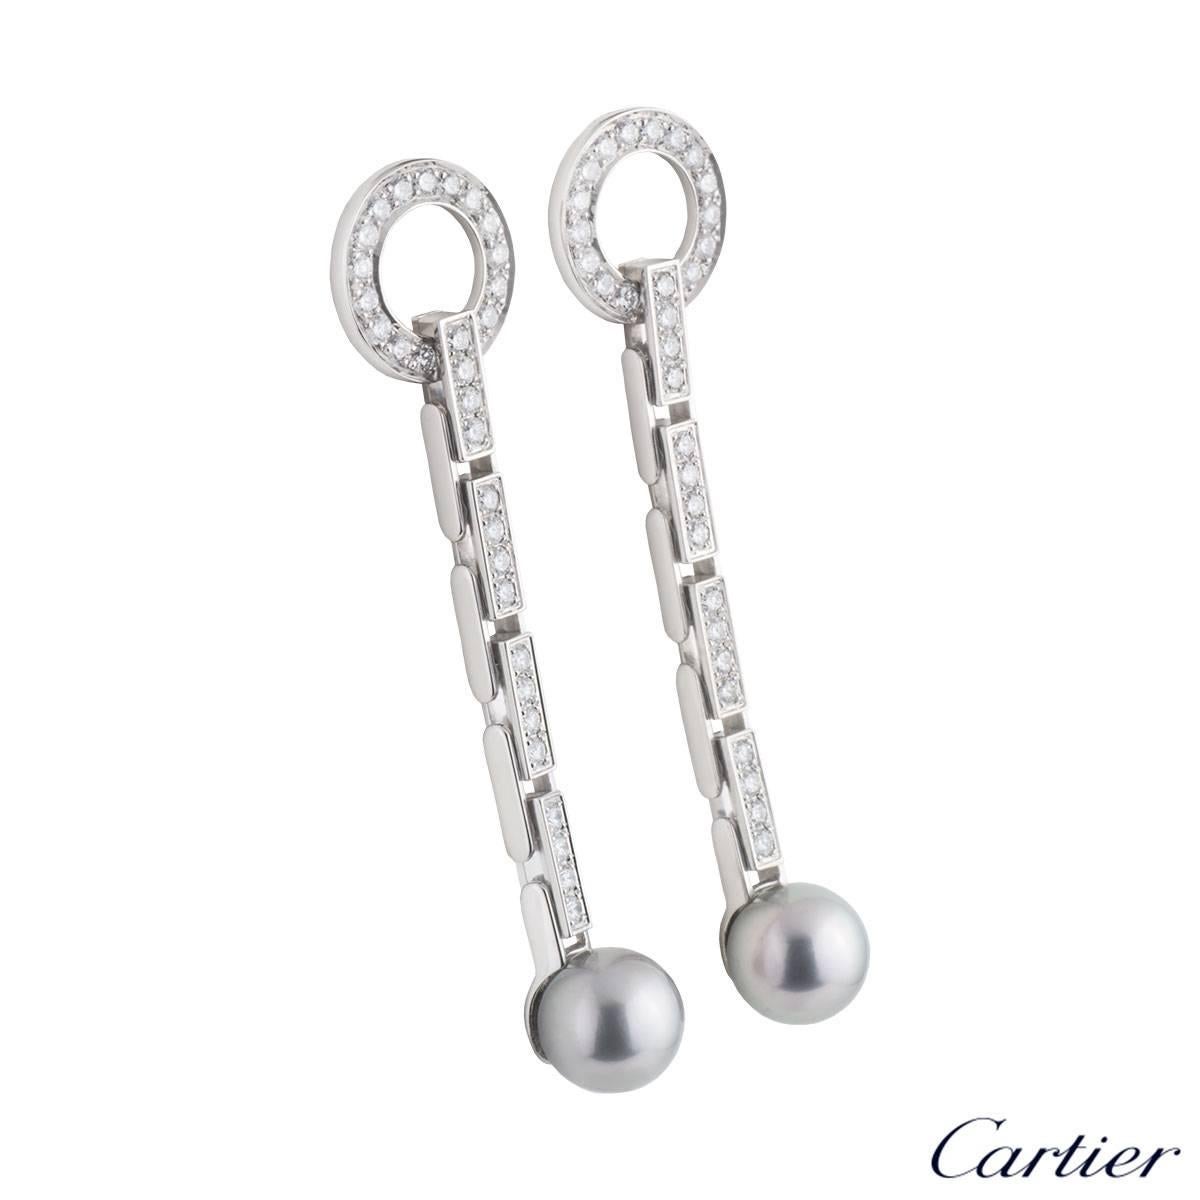 A beautiful pair of 18k white gold Cartier diamond and pearl drop earrings from the Agrafe collection. The earrings each comprise of a open work circular motif pave set with round brilliant cut diamonds. Complementing this motif is a flexible